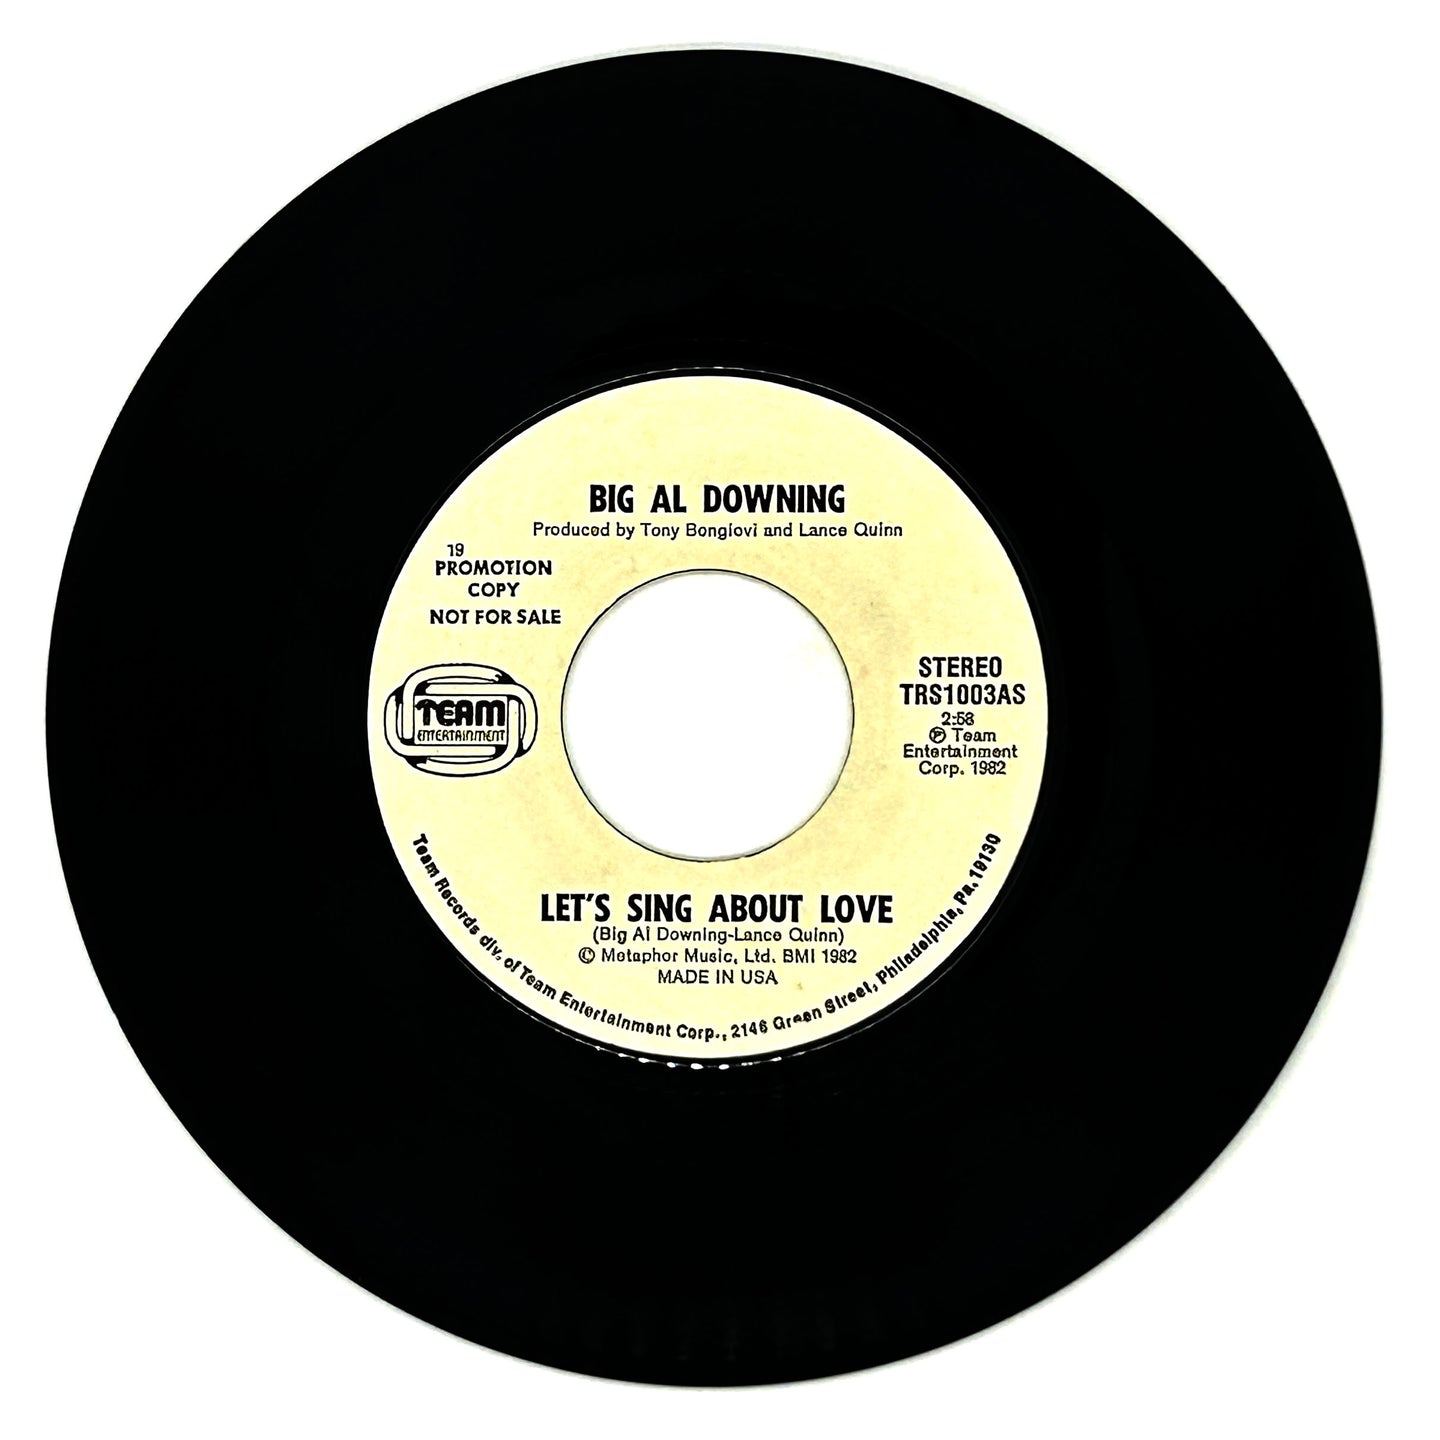 Big Al Downing : LET'S SING ABOUT LOVE/ LET'S SING ABOUT LOVE